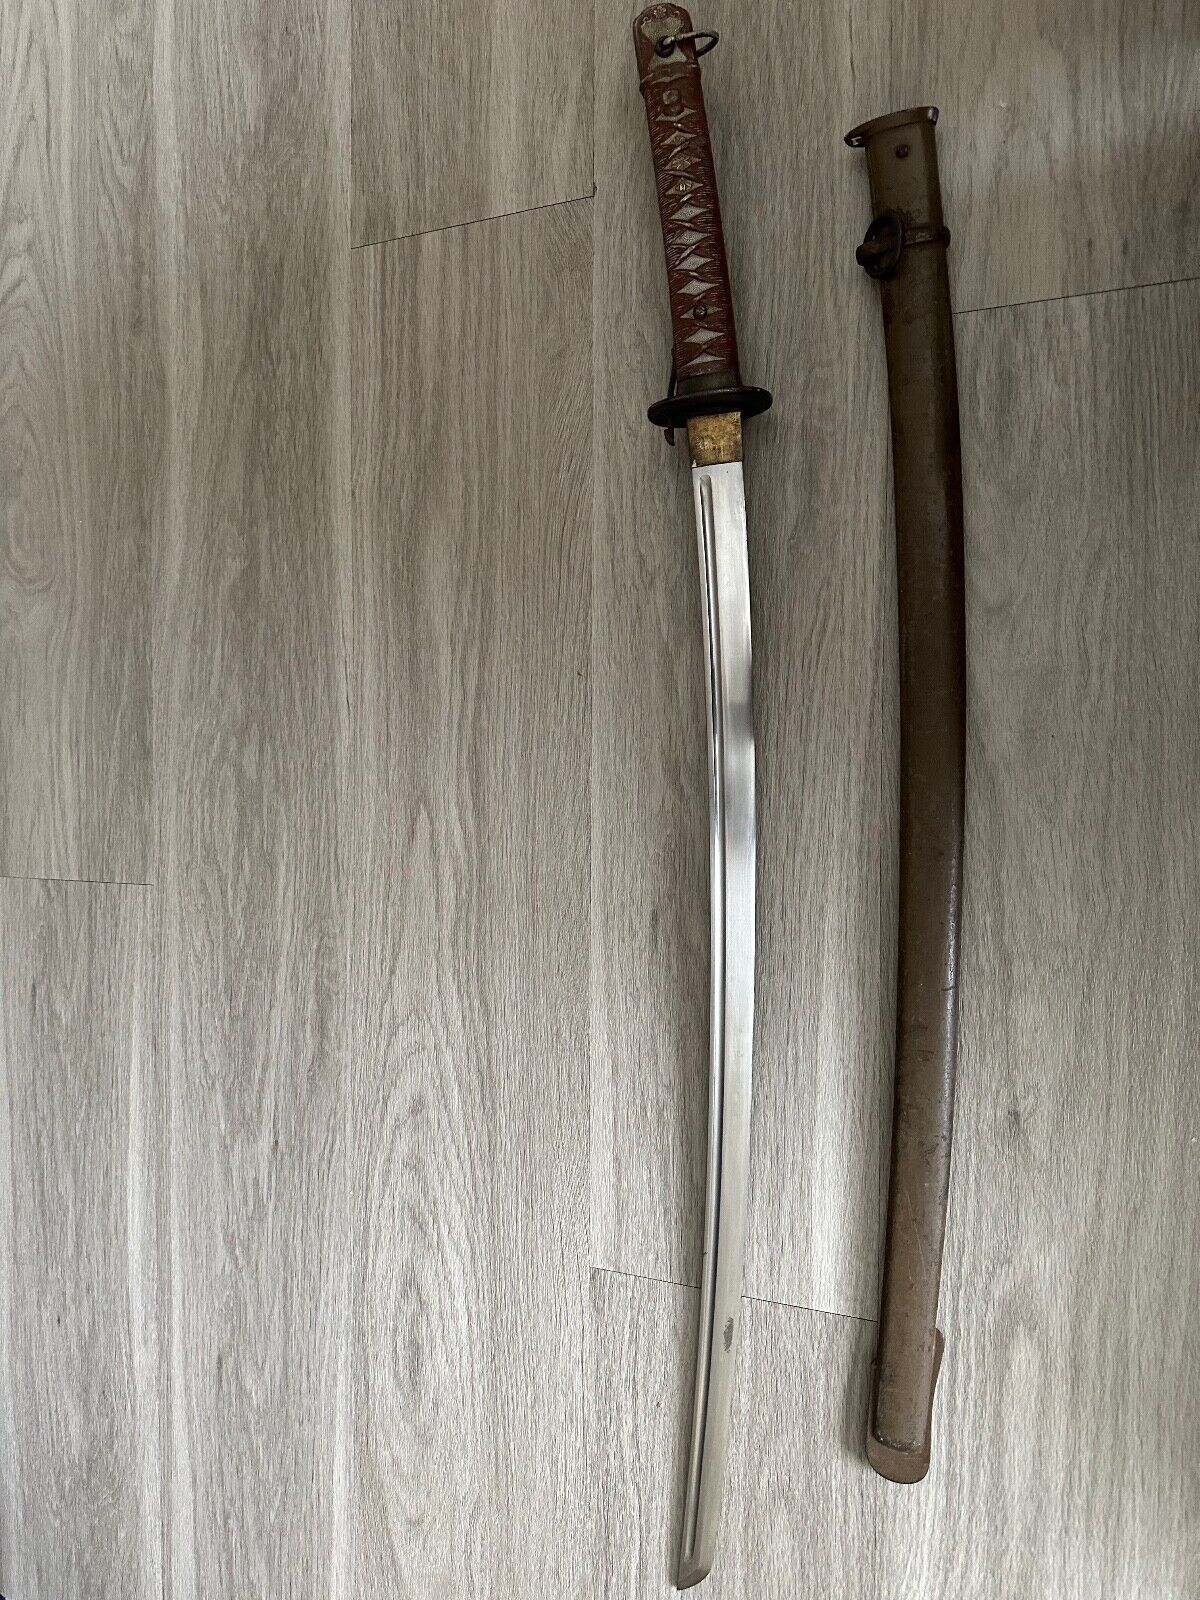 WWII WW2 Japanese NCO Sword Matching Numbers on Blade and Scabbard